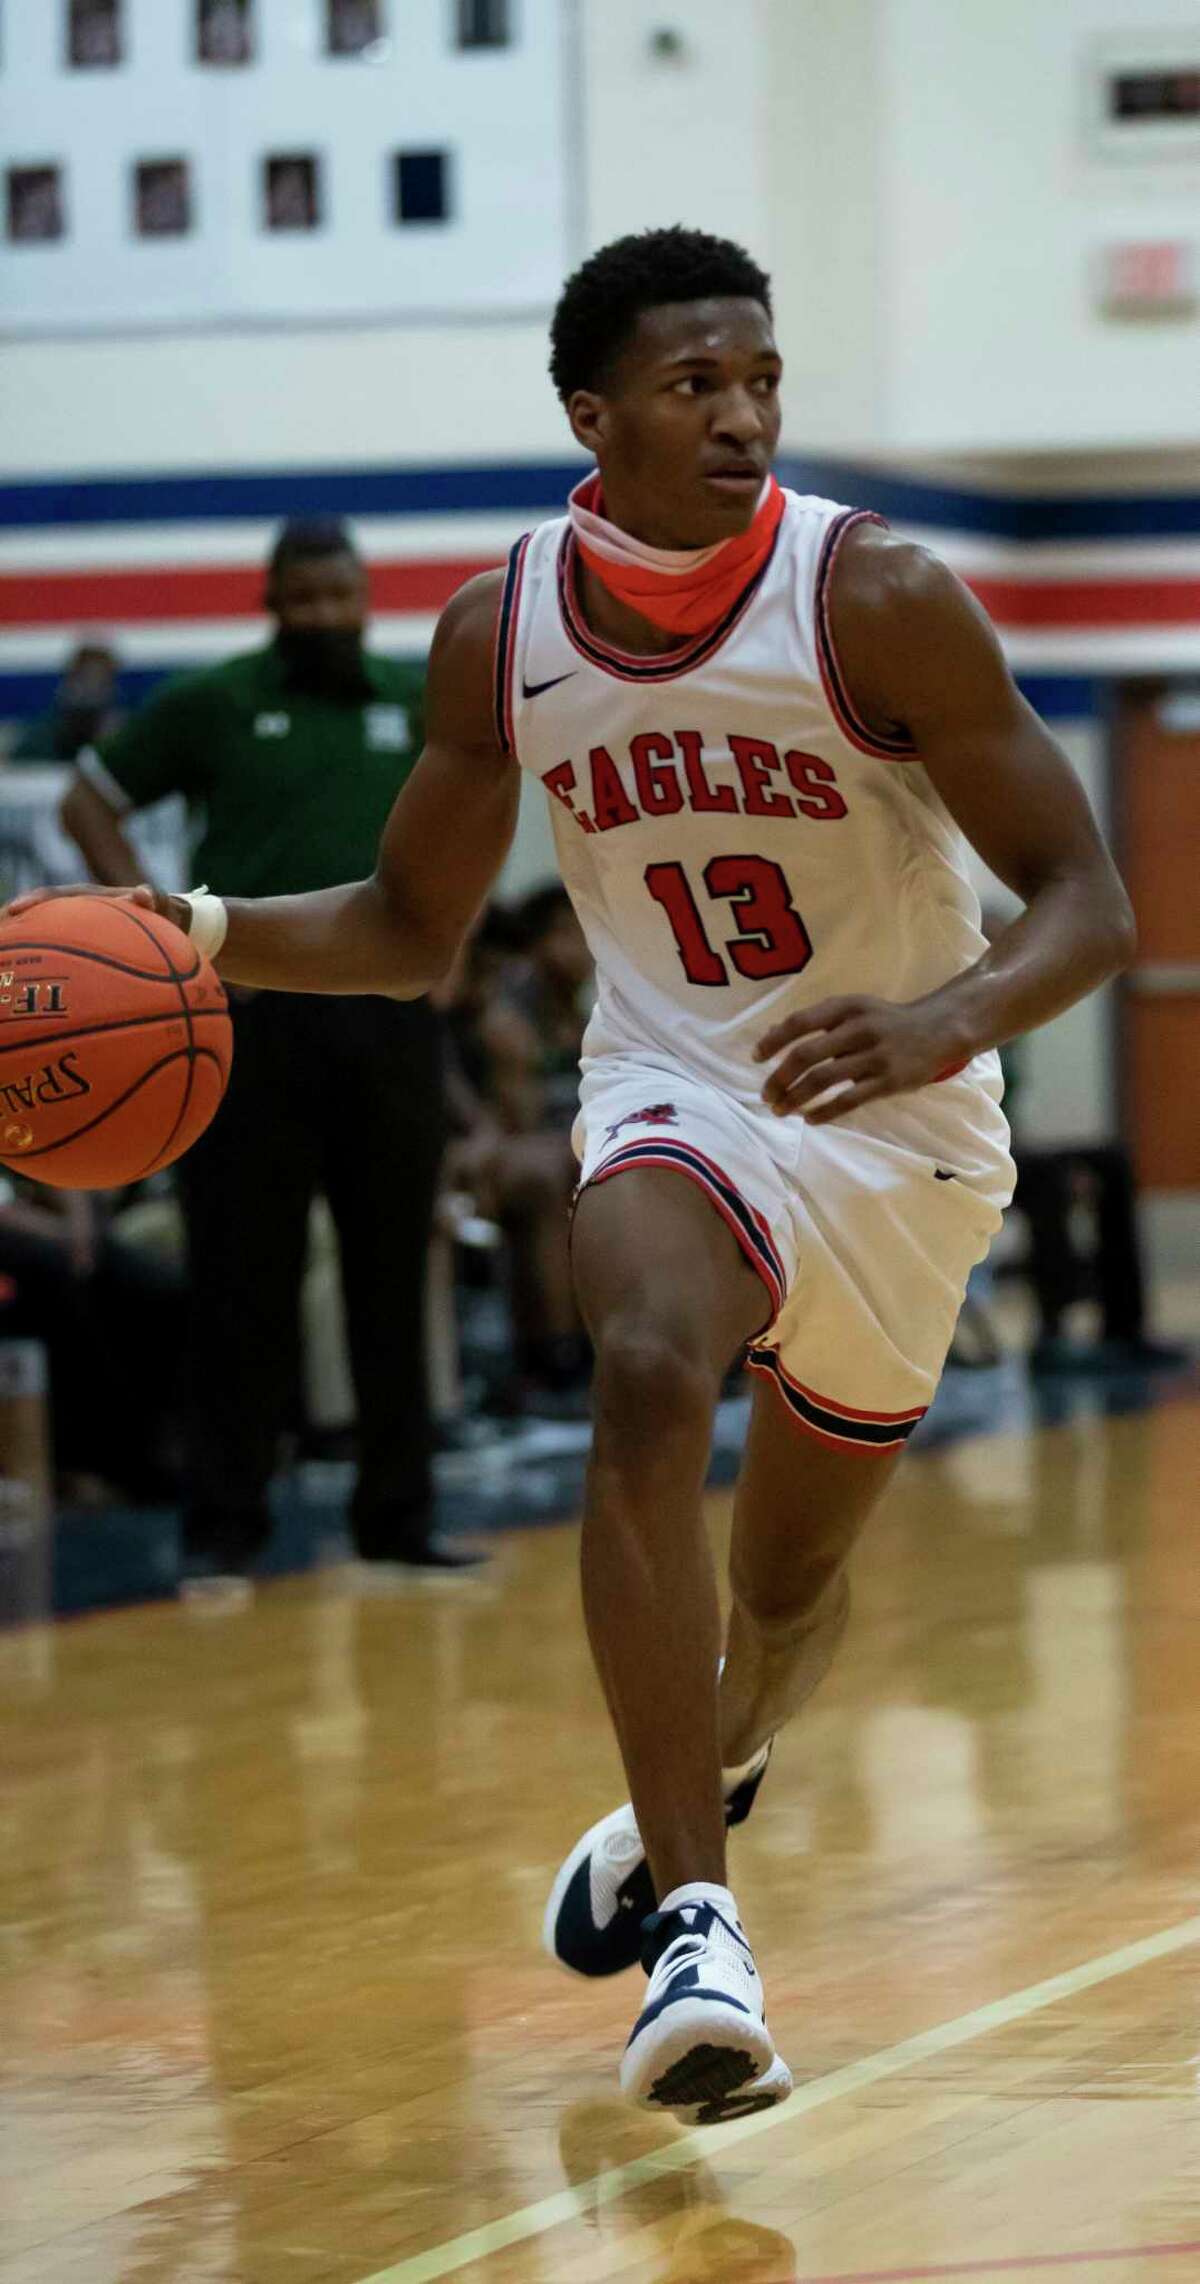 Atascocita Justin Collins (13) drives the ball during the fourth quarter of a non-district basketball game against Fort Bend at Atascocita High School, Wednesday, Nov. 25, 2020, in Atascocita.